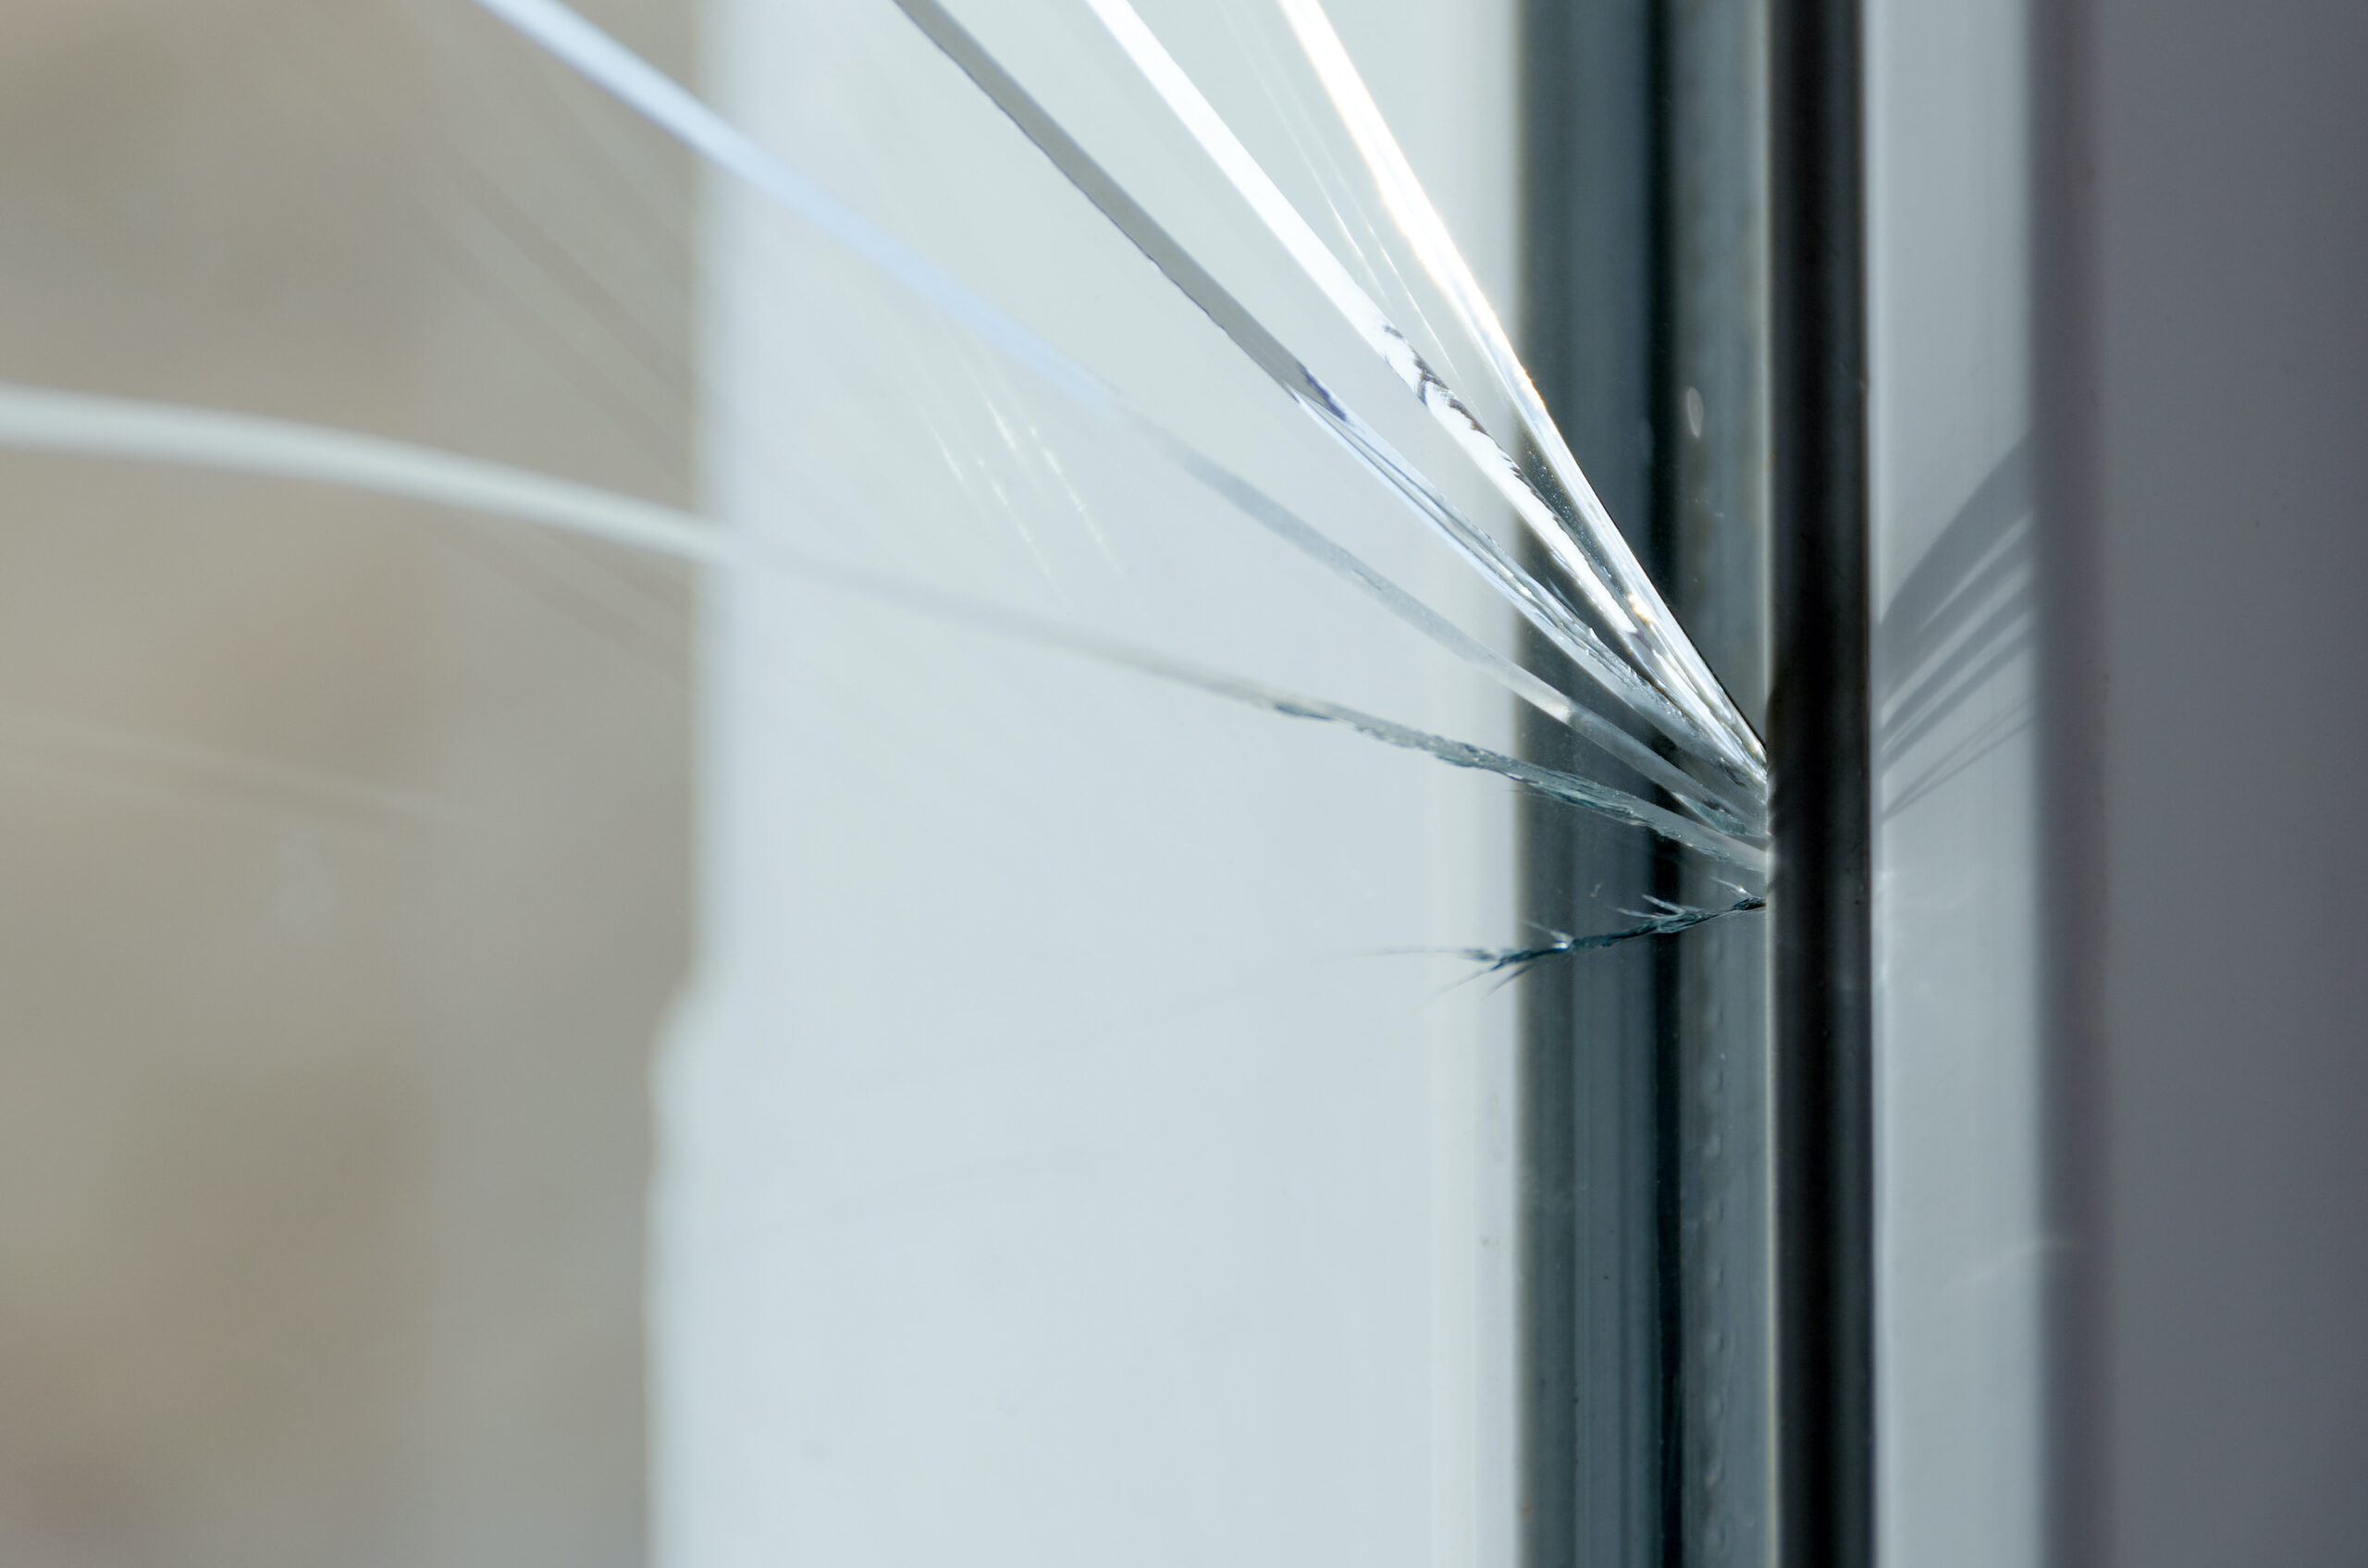 How To Seal Cracked Glass